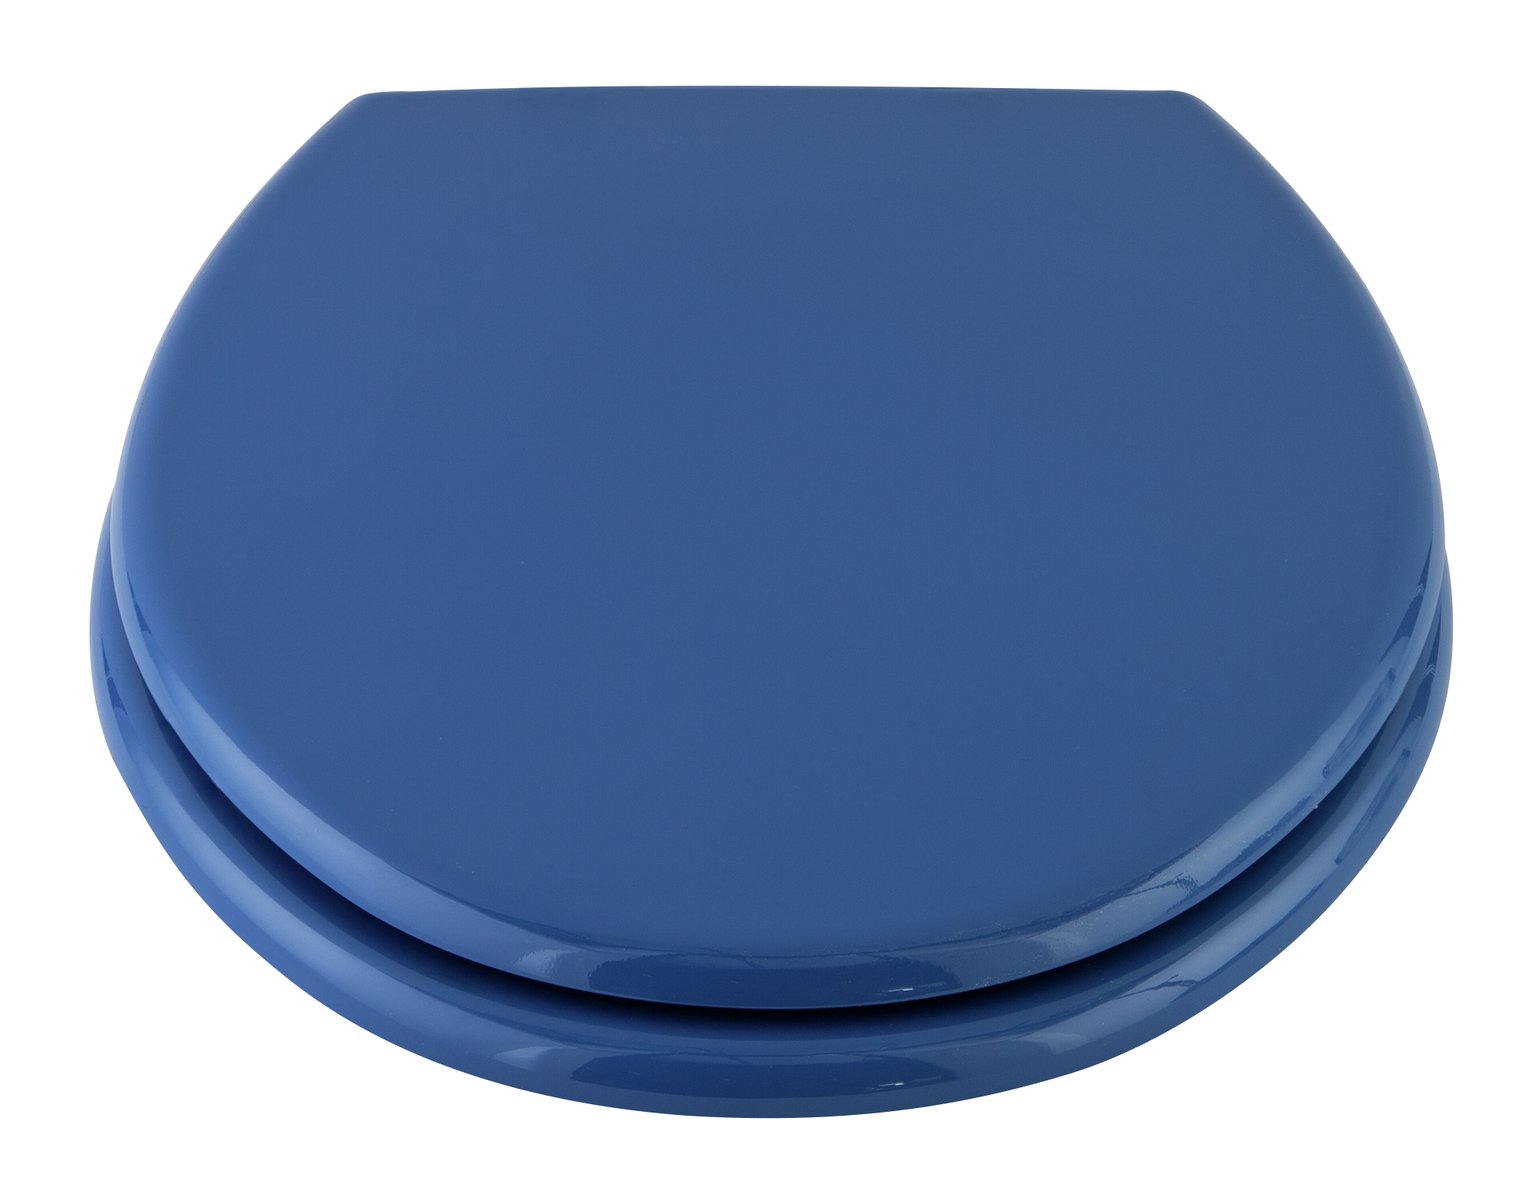 Argos Home Moulded Wood Toilet Seat - Ink Blue